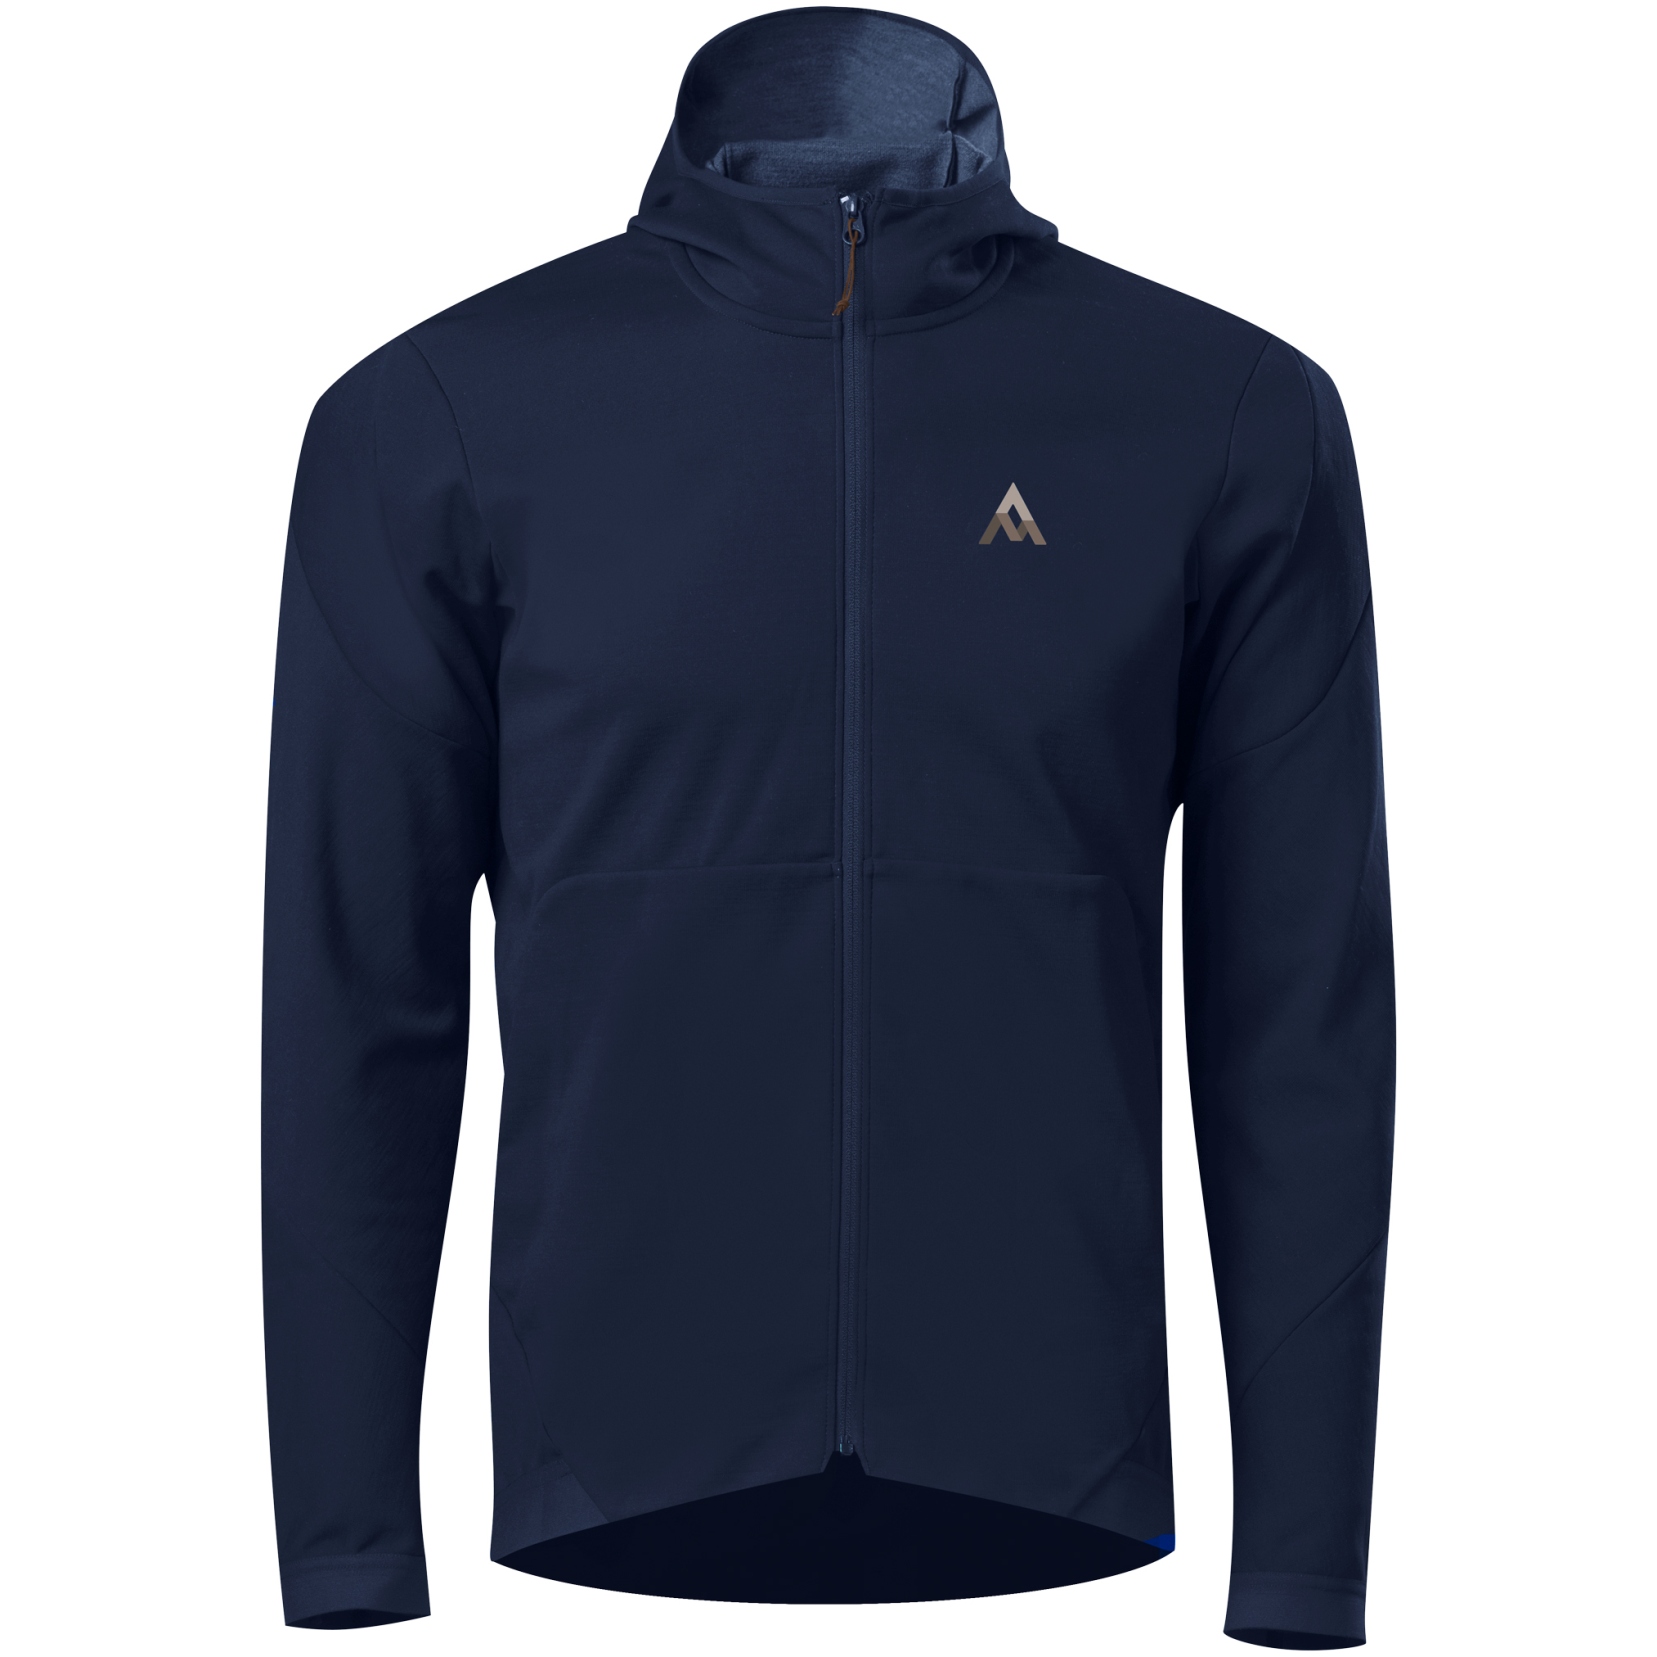 Picture of 7mesh Callaghan Merino Hoody Jacket - Midnight Blue